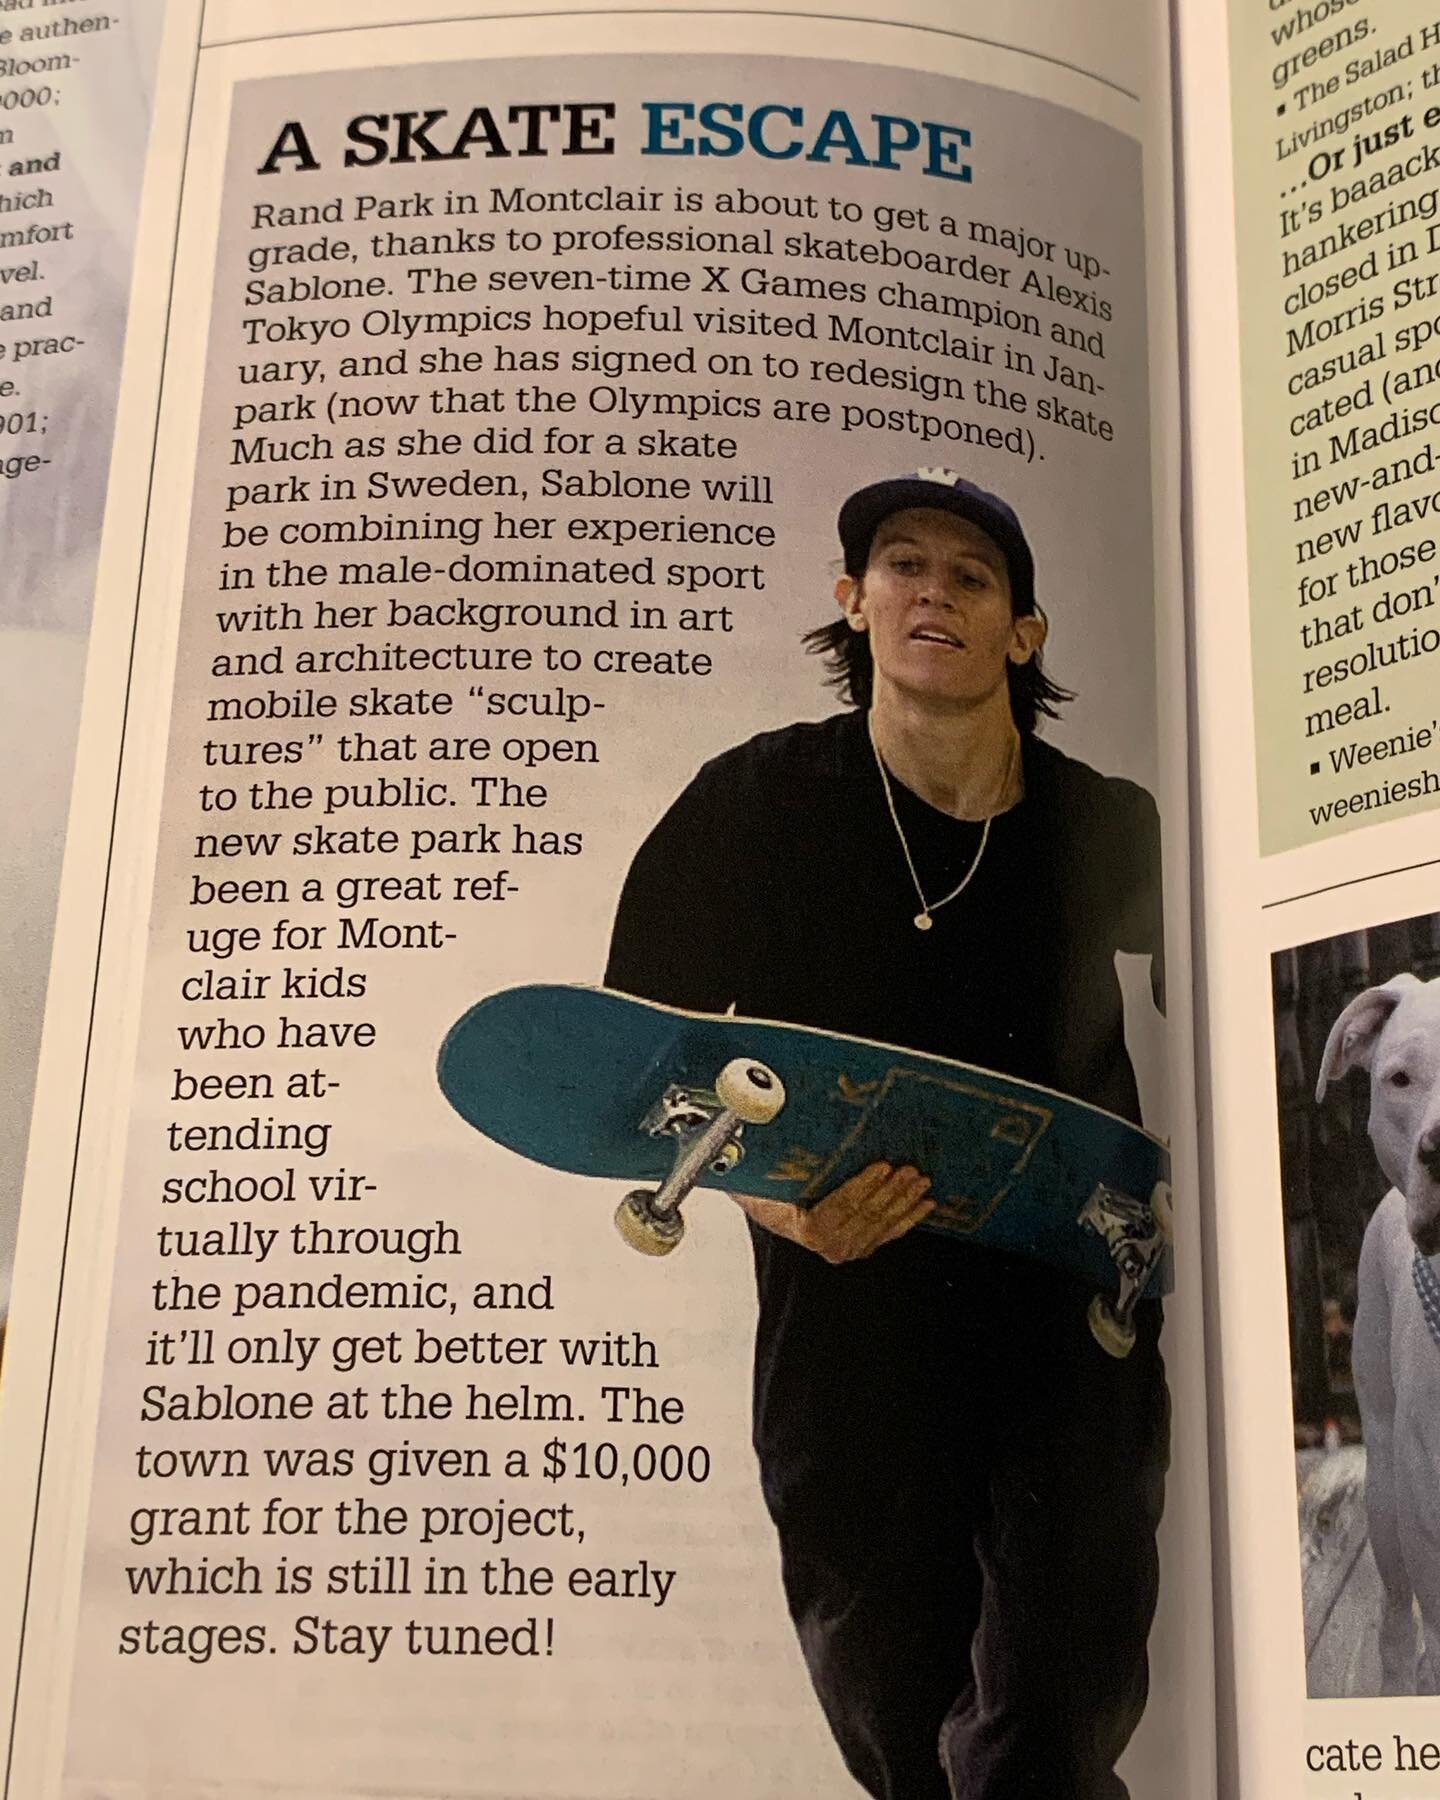 A nice little write up in @morrisessexhealthandlife magazine highlighting @courtskatepark project with @suminaynay #montclairnj #montclair @mhs_skateclub